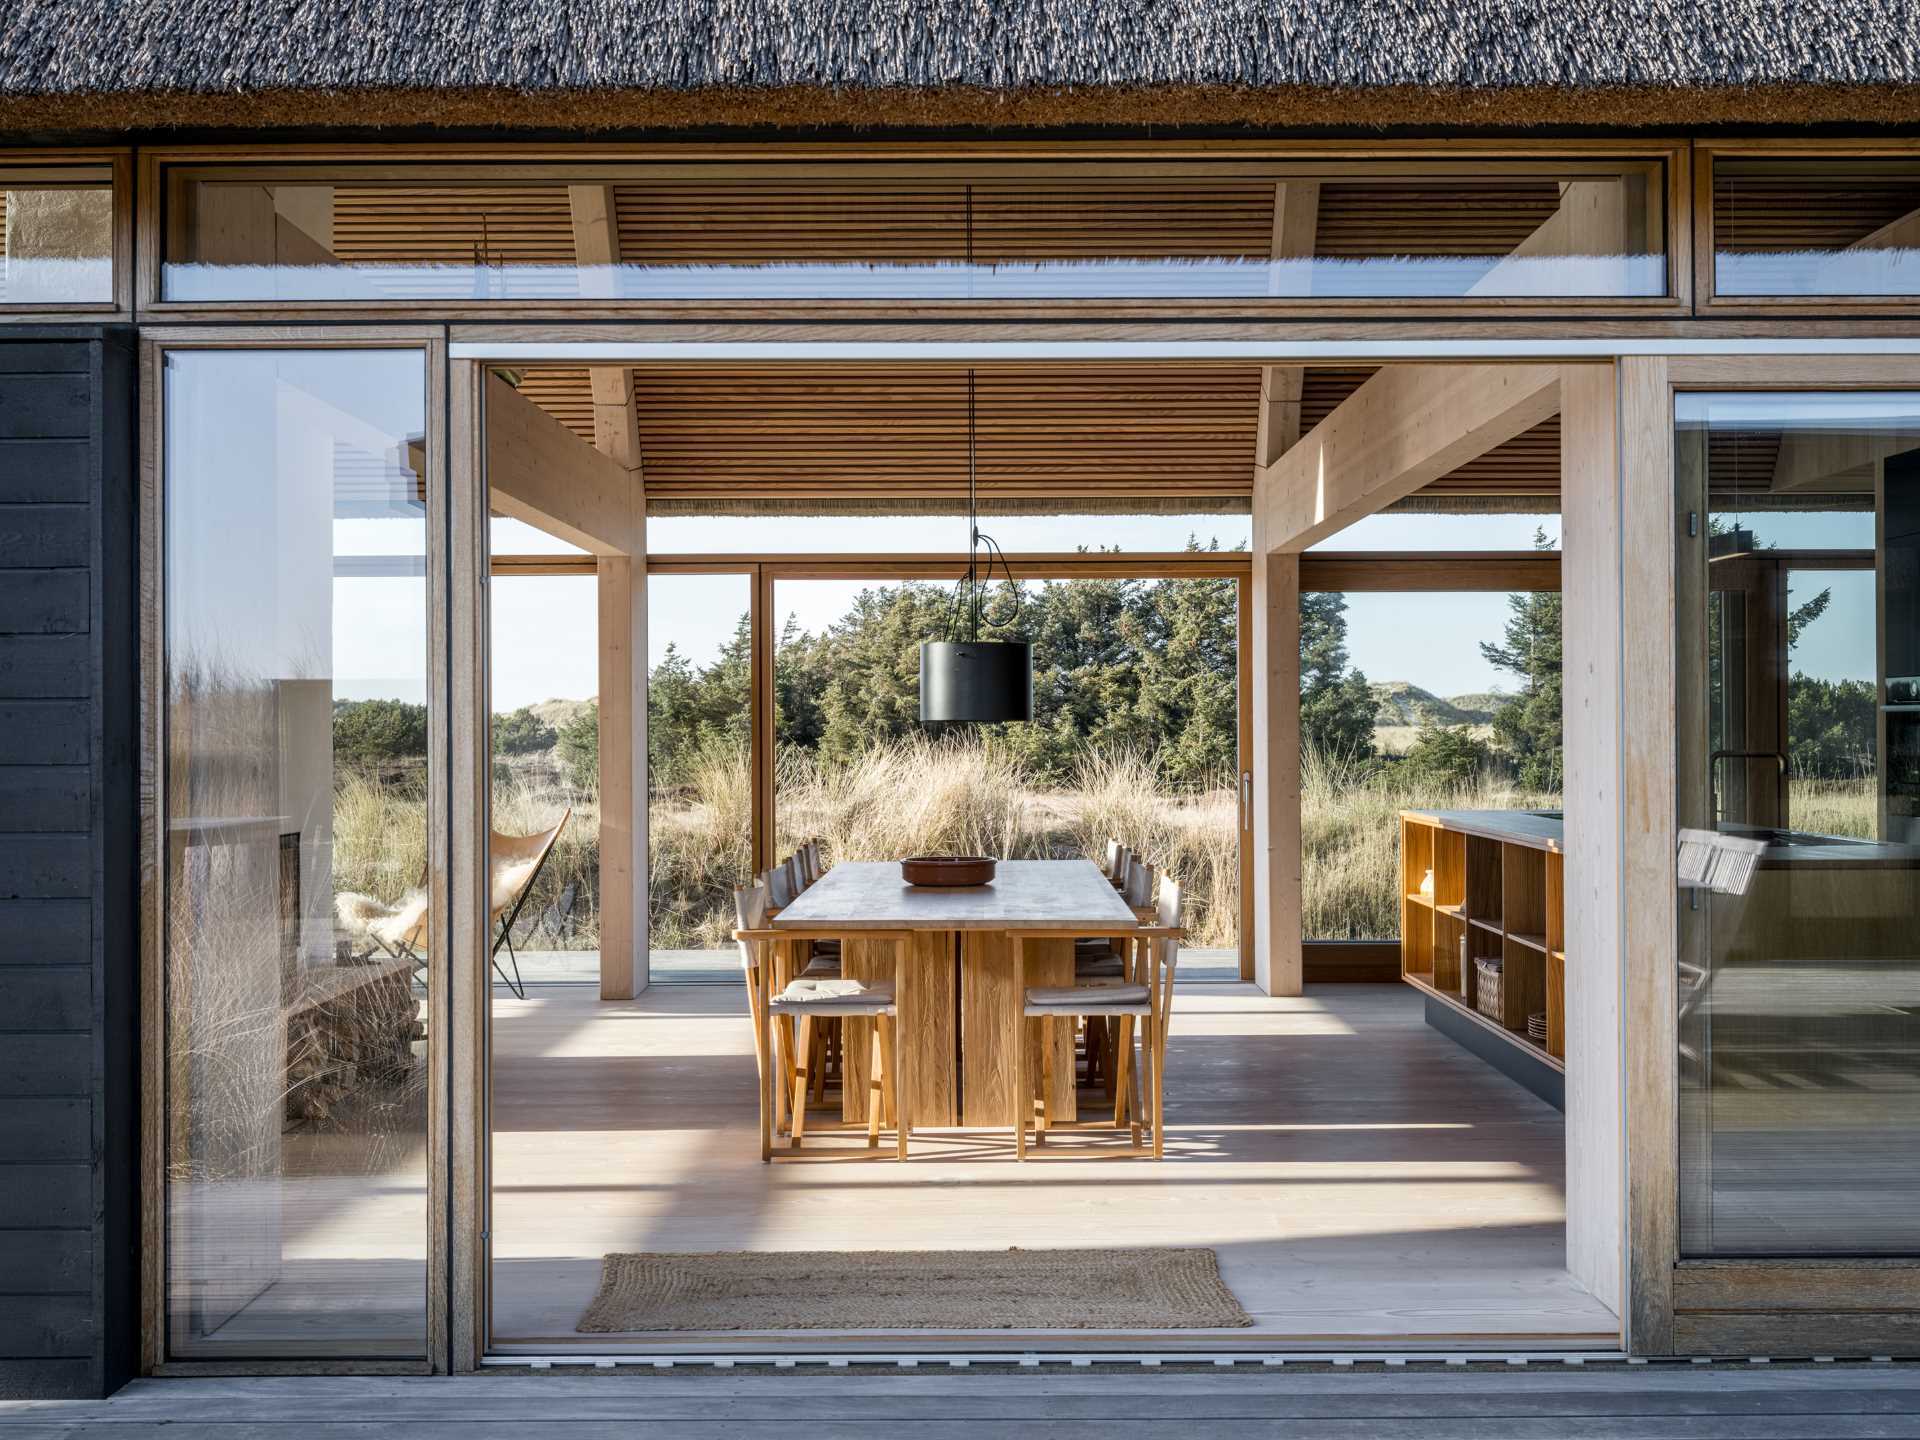 Sliding doors open the house to the outdoors on both sides, and allow the breeze to flow through.